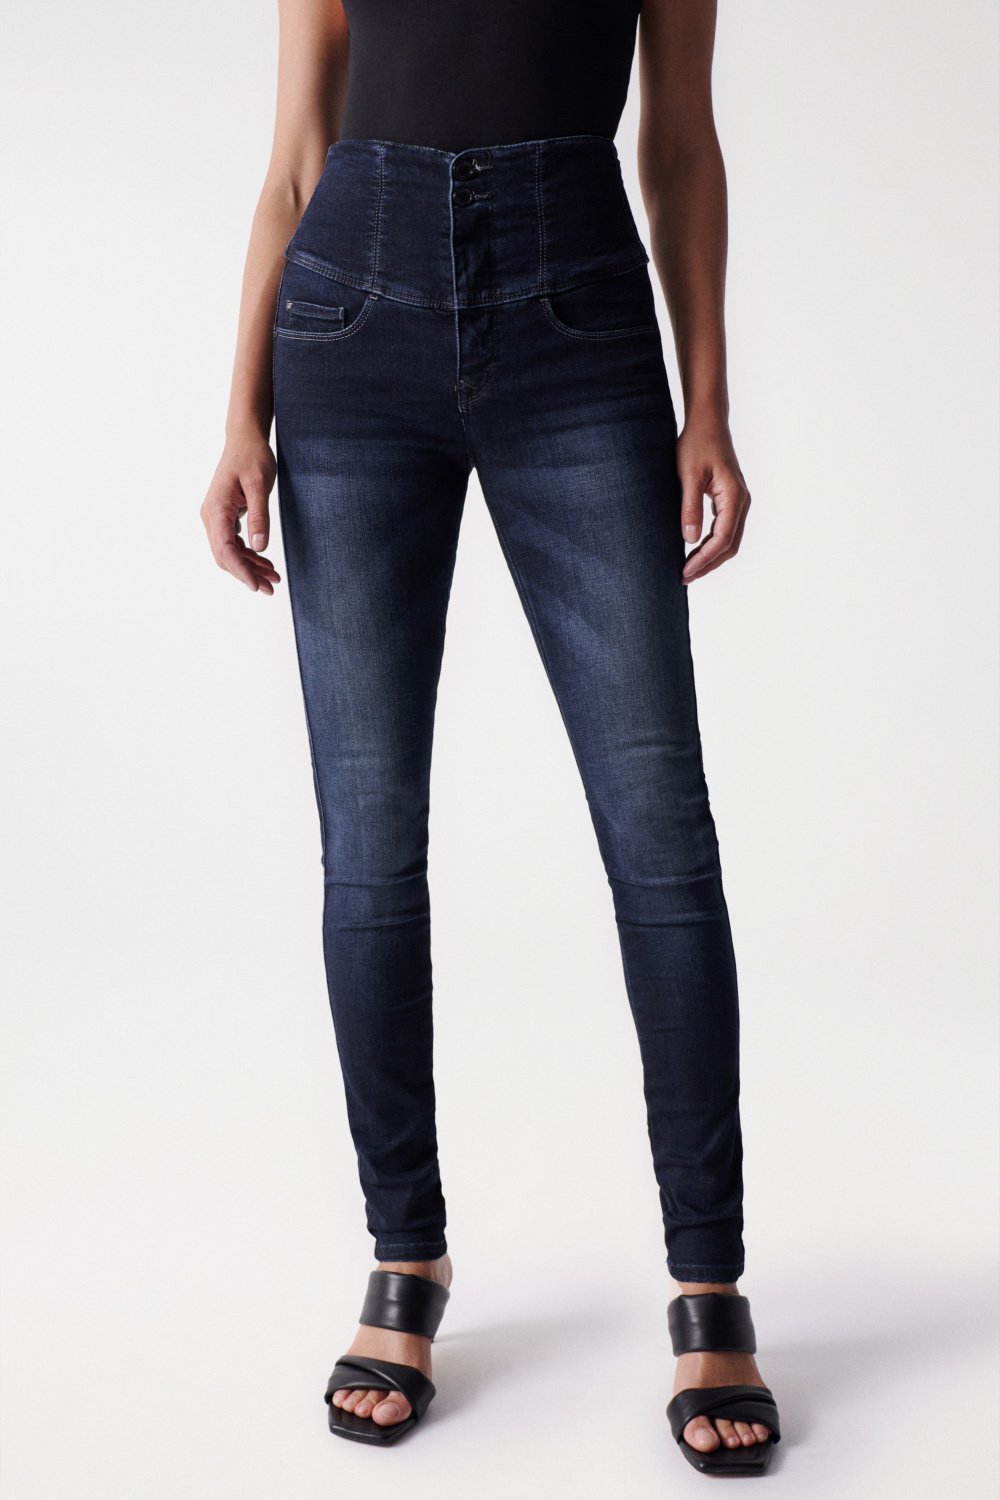 DIVA SKINNY SHAPING SOFT TOUCH JEANS - Salsa